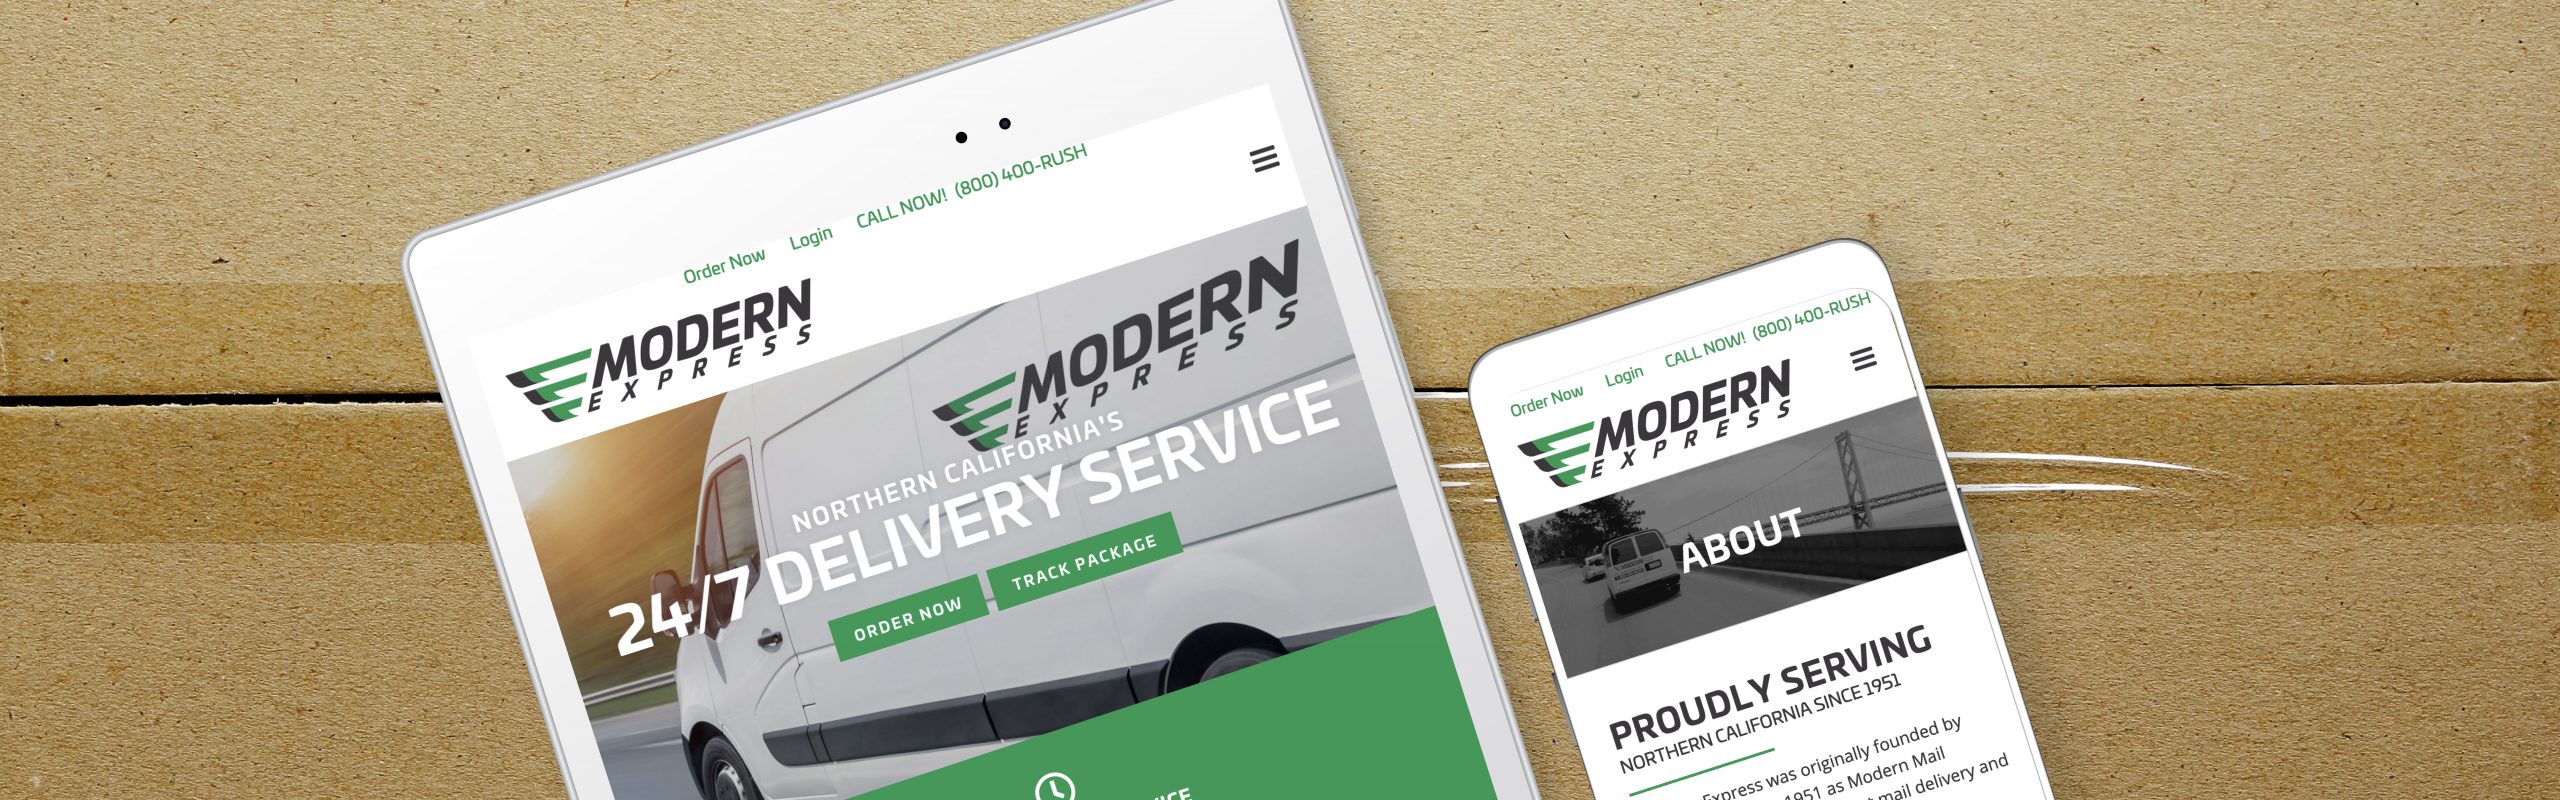 A tablet and a smartphone displaying a website for a modern express delivery service with consistent branding and design layout.